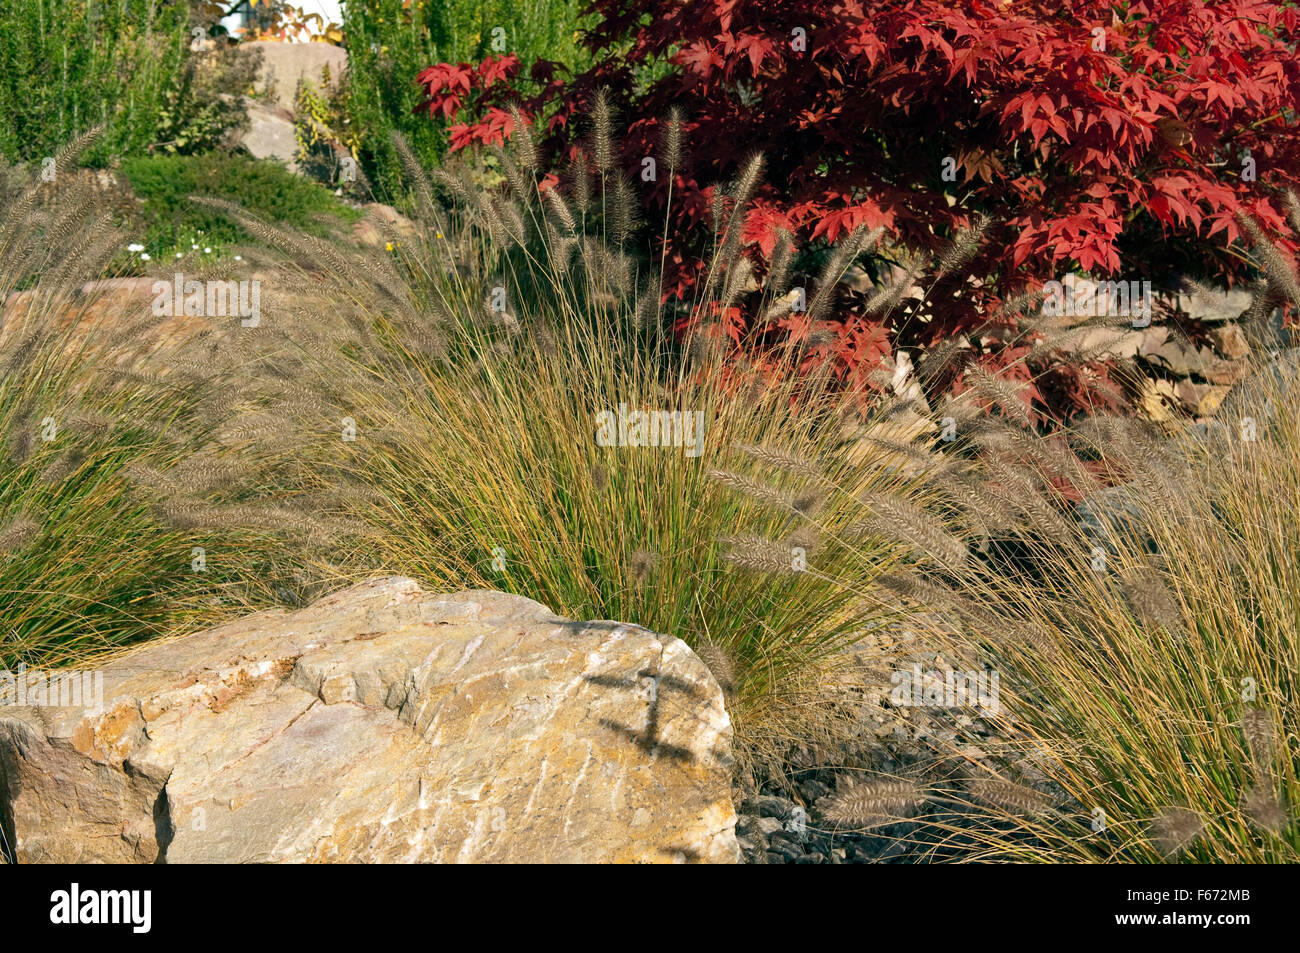 Japanese Acer Rockery High Resolution Stock Photography and Images - Alamy